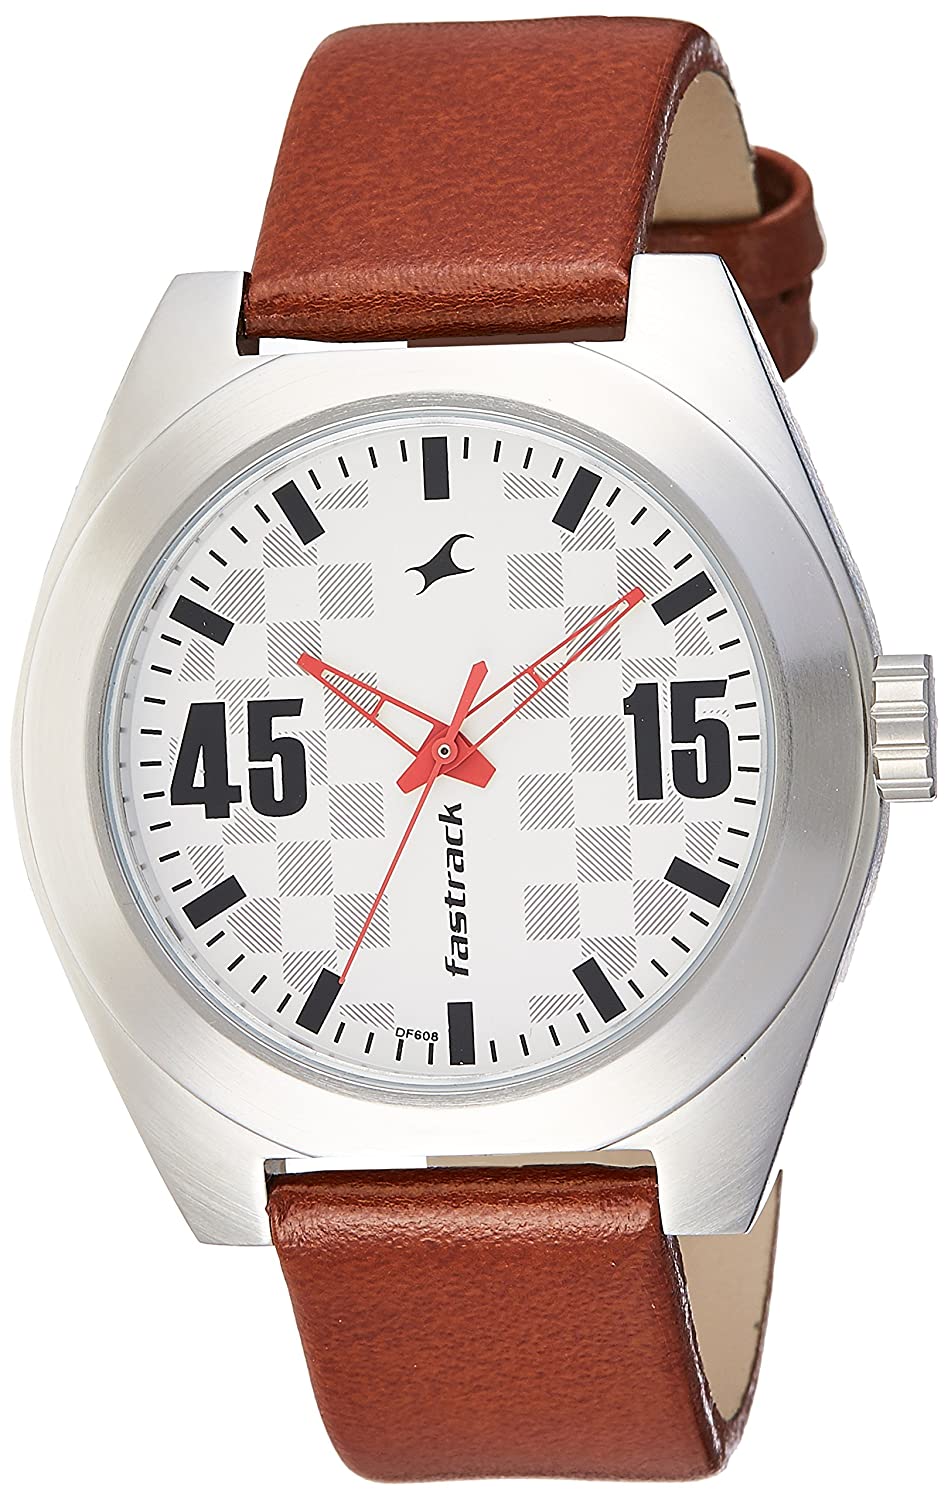 Fastrack Analog Men's Watch 3110SL01 | Leather Band | Water-Resistant | Quartz Movement | Classic Style | Fashionable | Durable | Affordable | Halabh.com